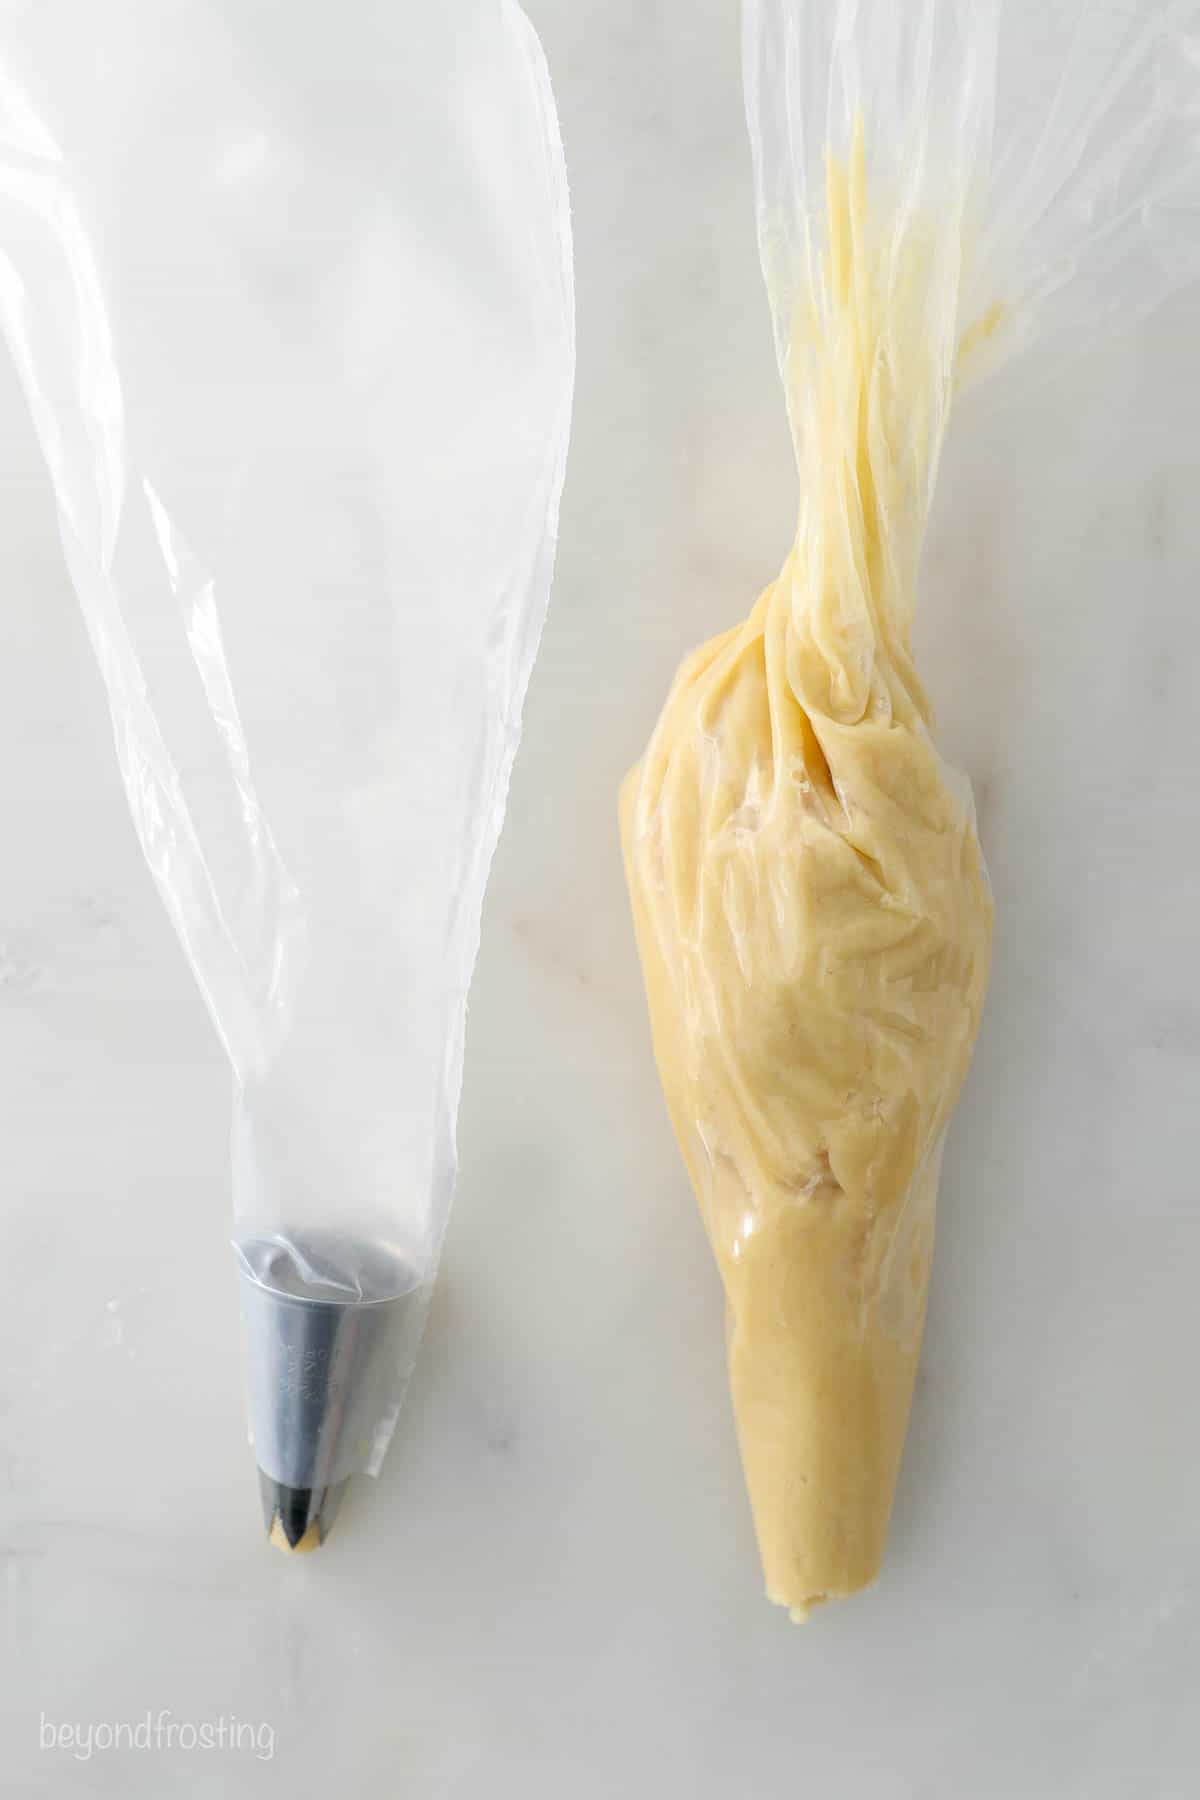 A piping bag fitted with a large open star piping tip beside a second bag containing a cup of dough